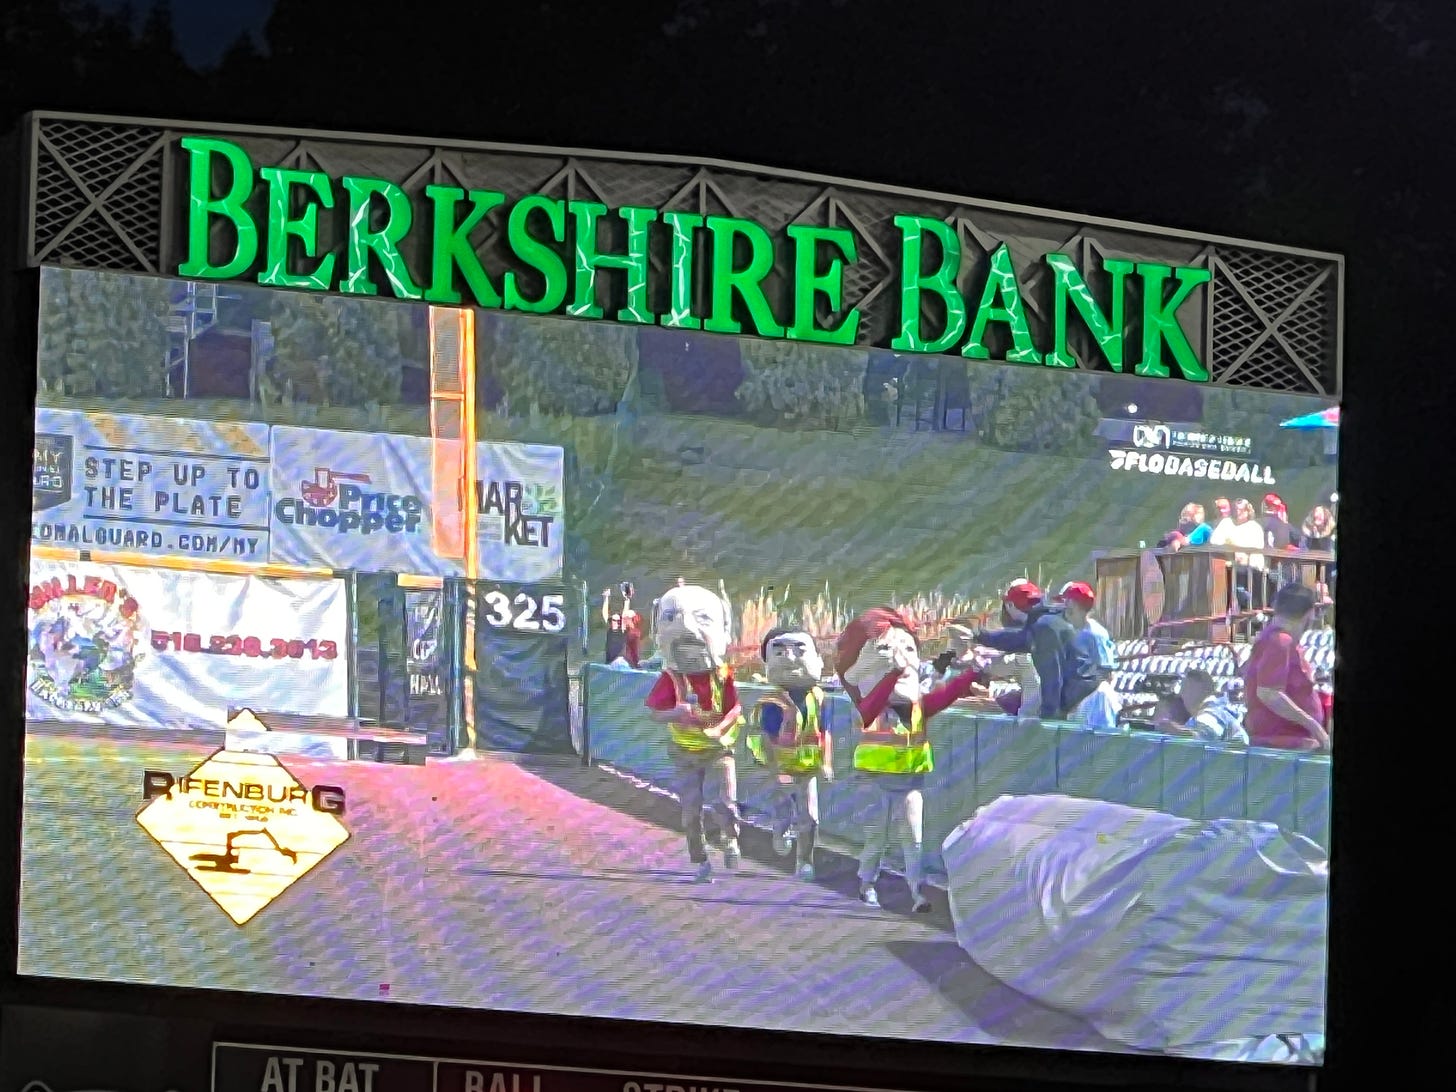 the three mayors racing on the big screen at the ballpark. Rifenbeurg's logo in the bottom left.